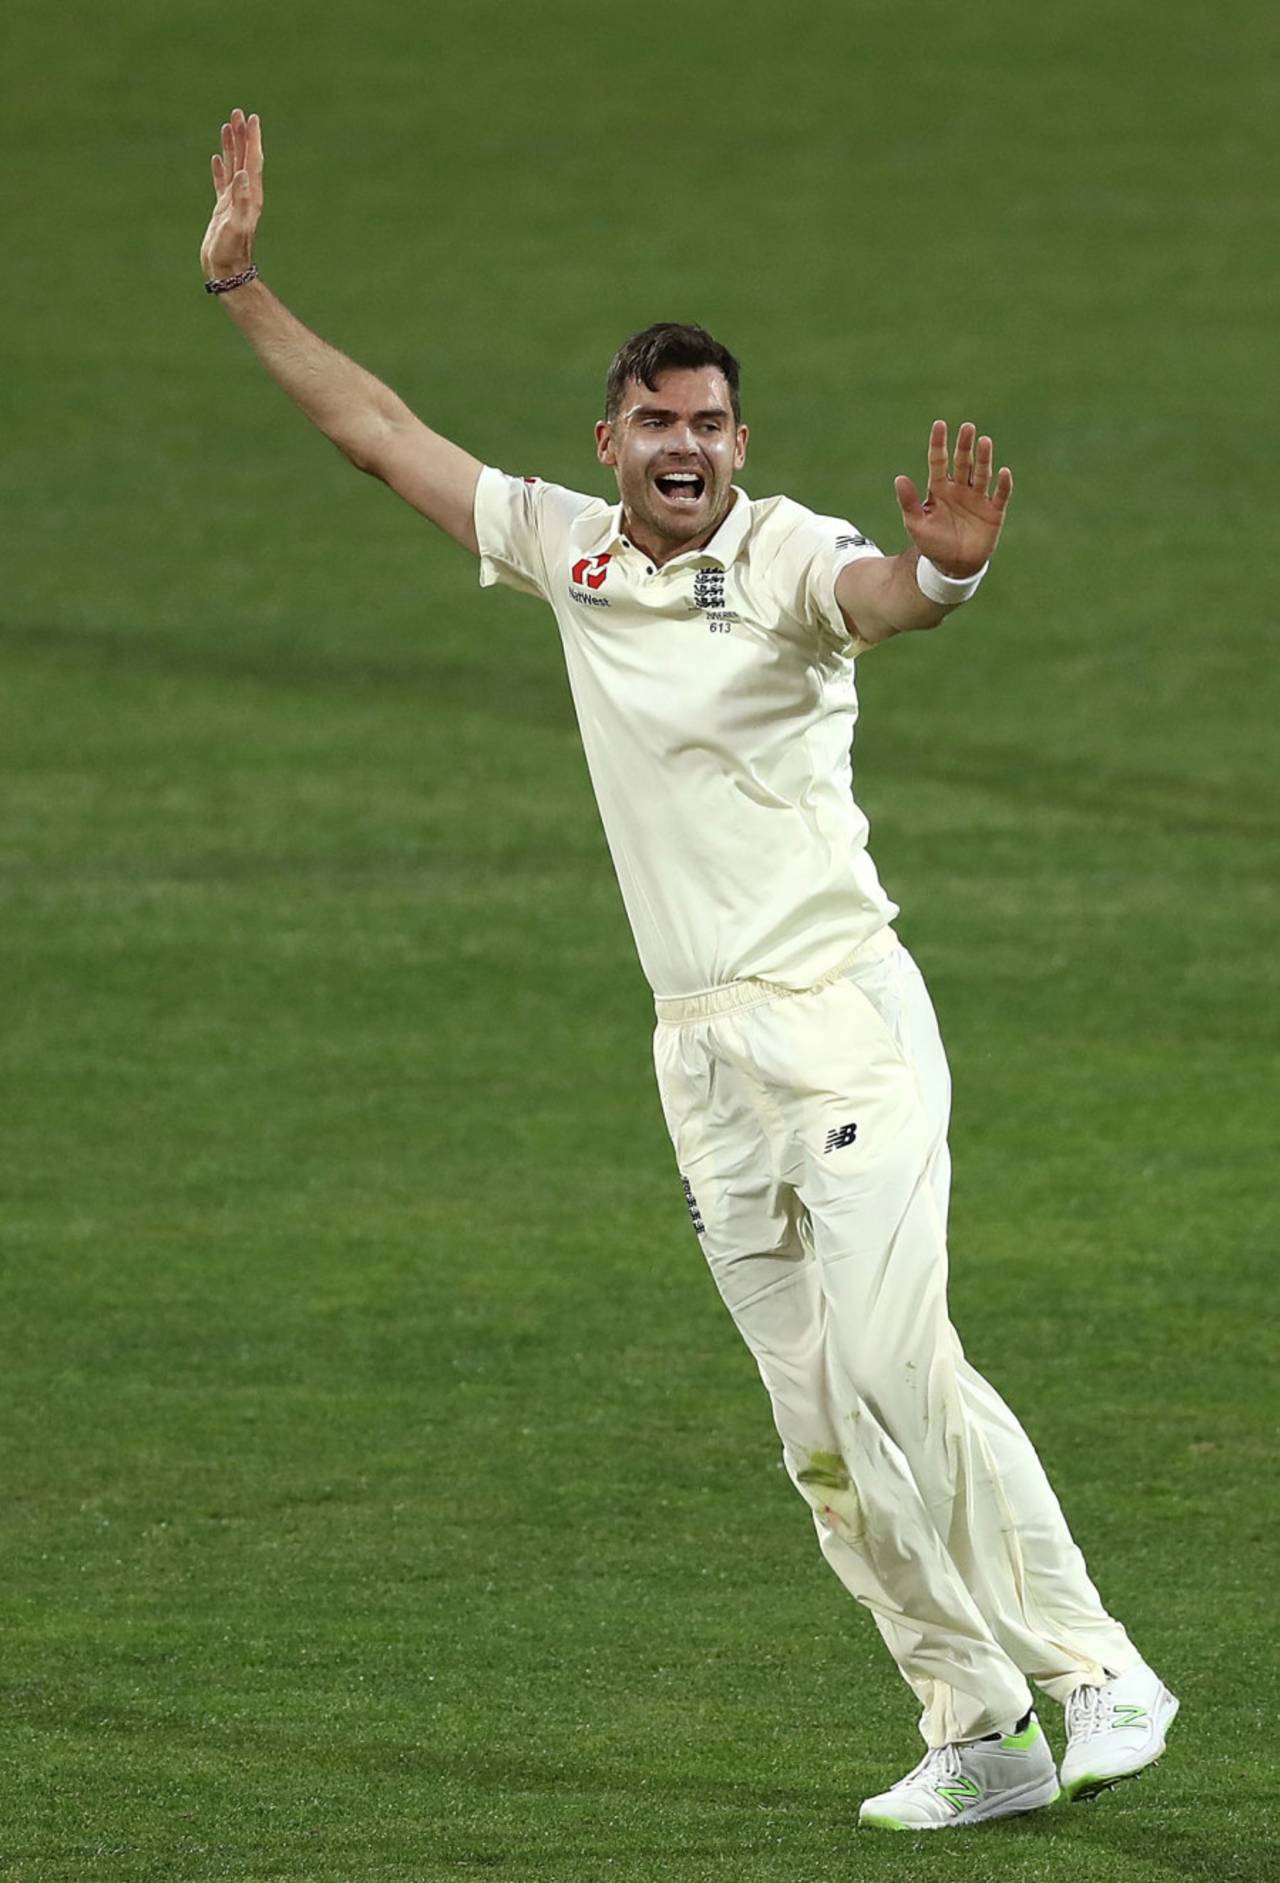 James Anderson continued his wicket-taking form&nbsp;&nbsp;&bull;&nbsp;&nbsp;Getty Images